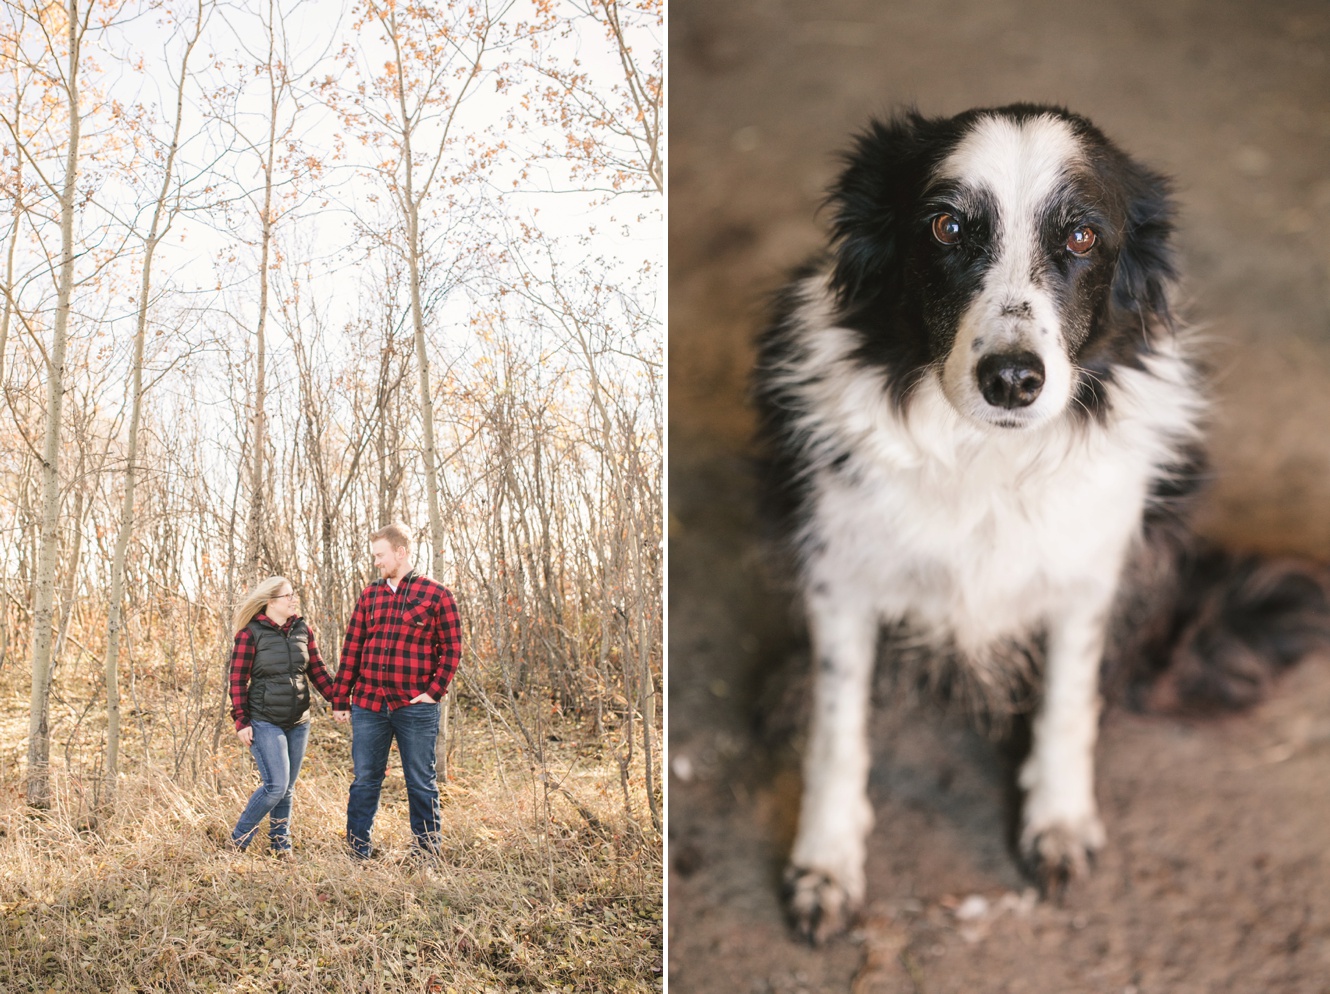 Tips for dog at engagement photo